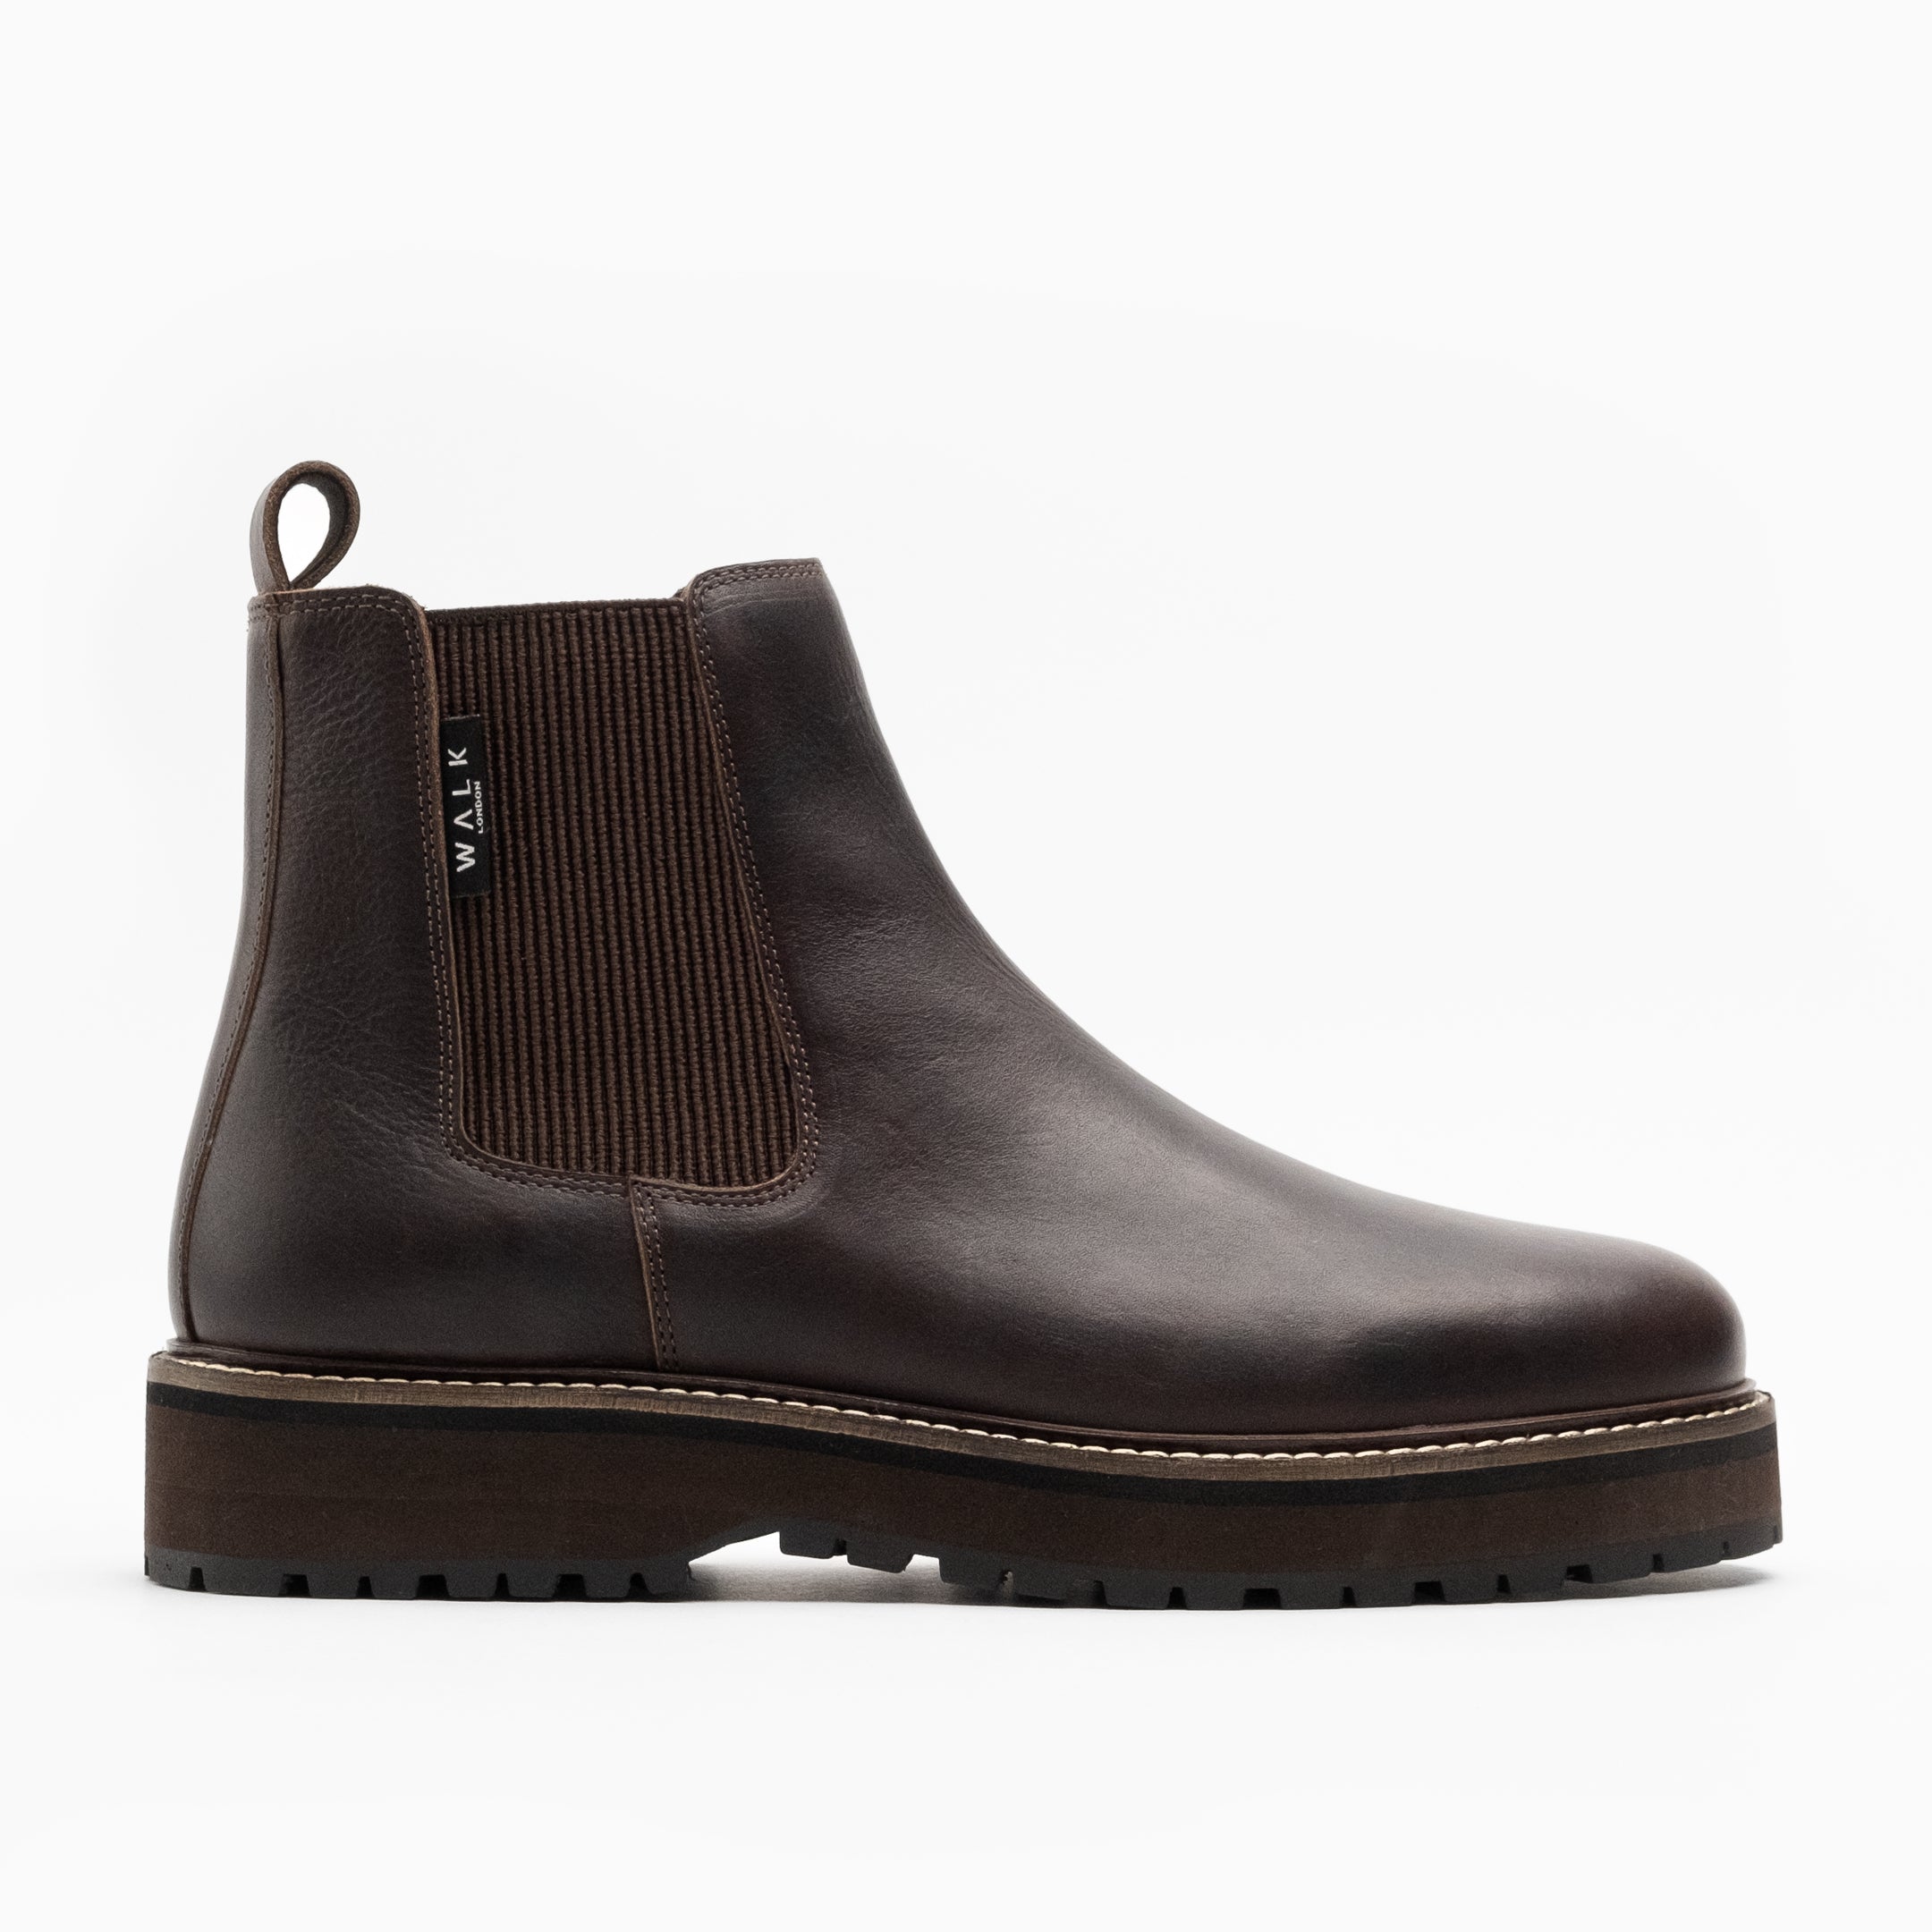 Walk London Mens Connery Chelsea Boot in Brown Leather